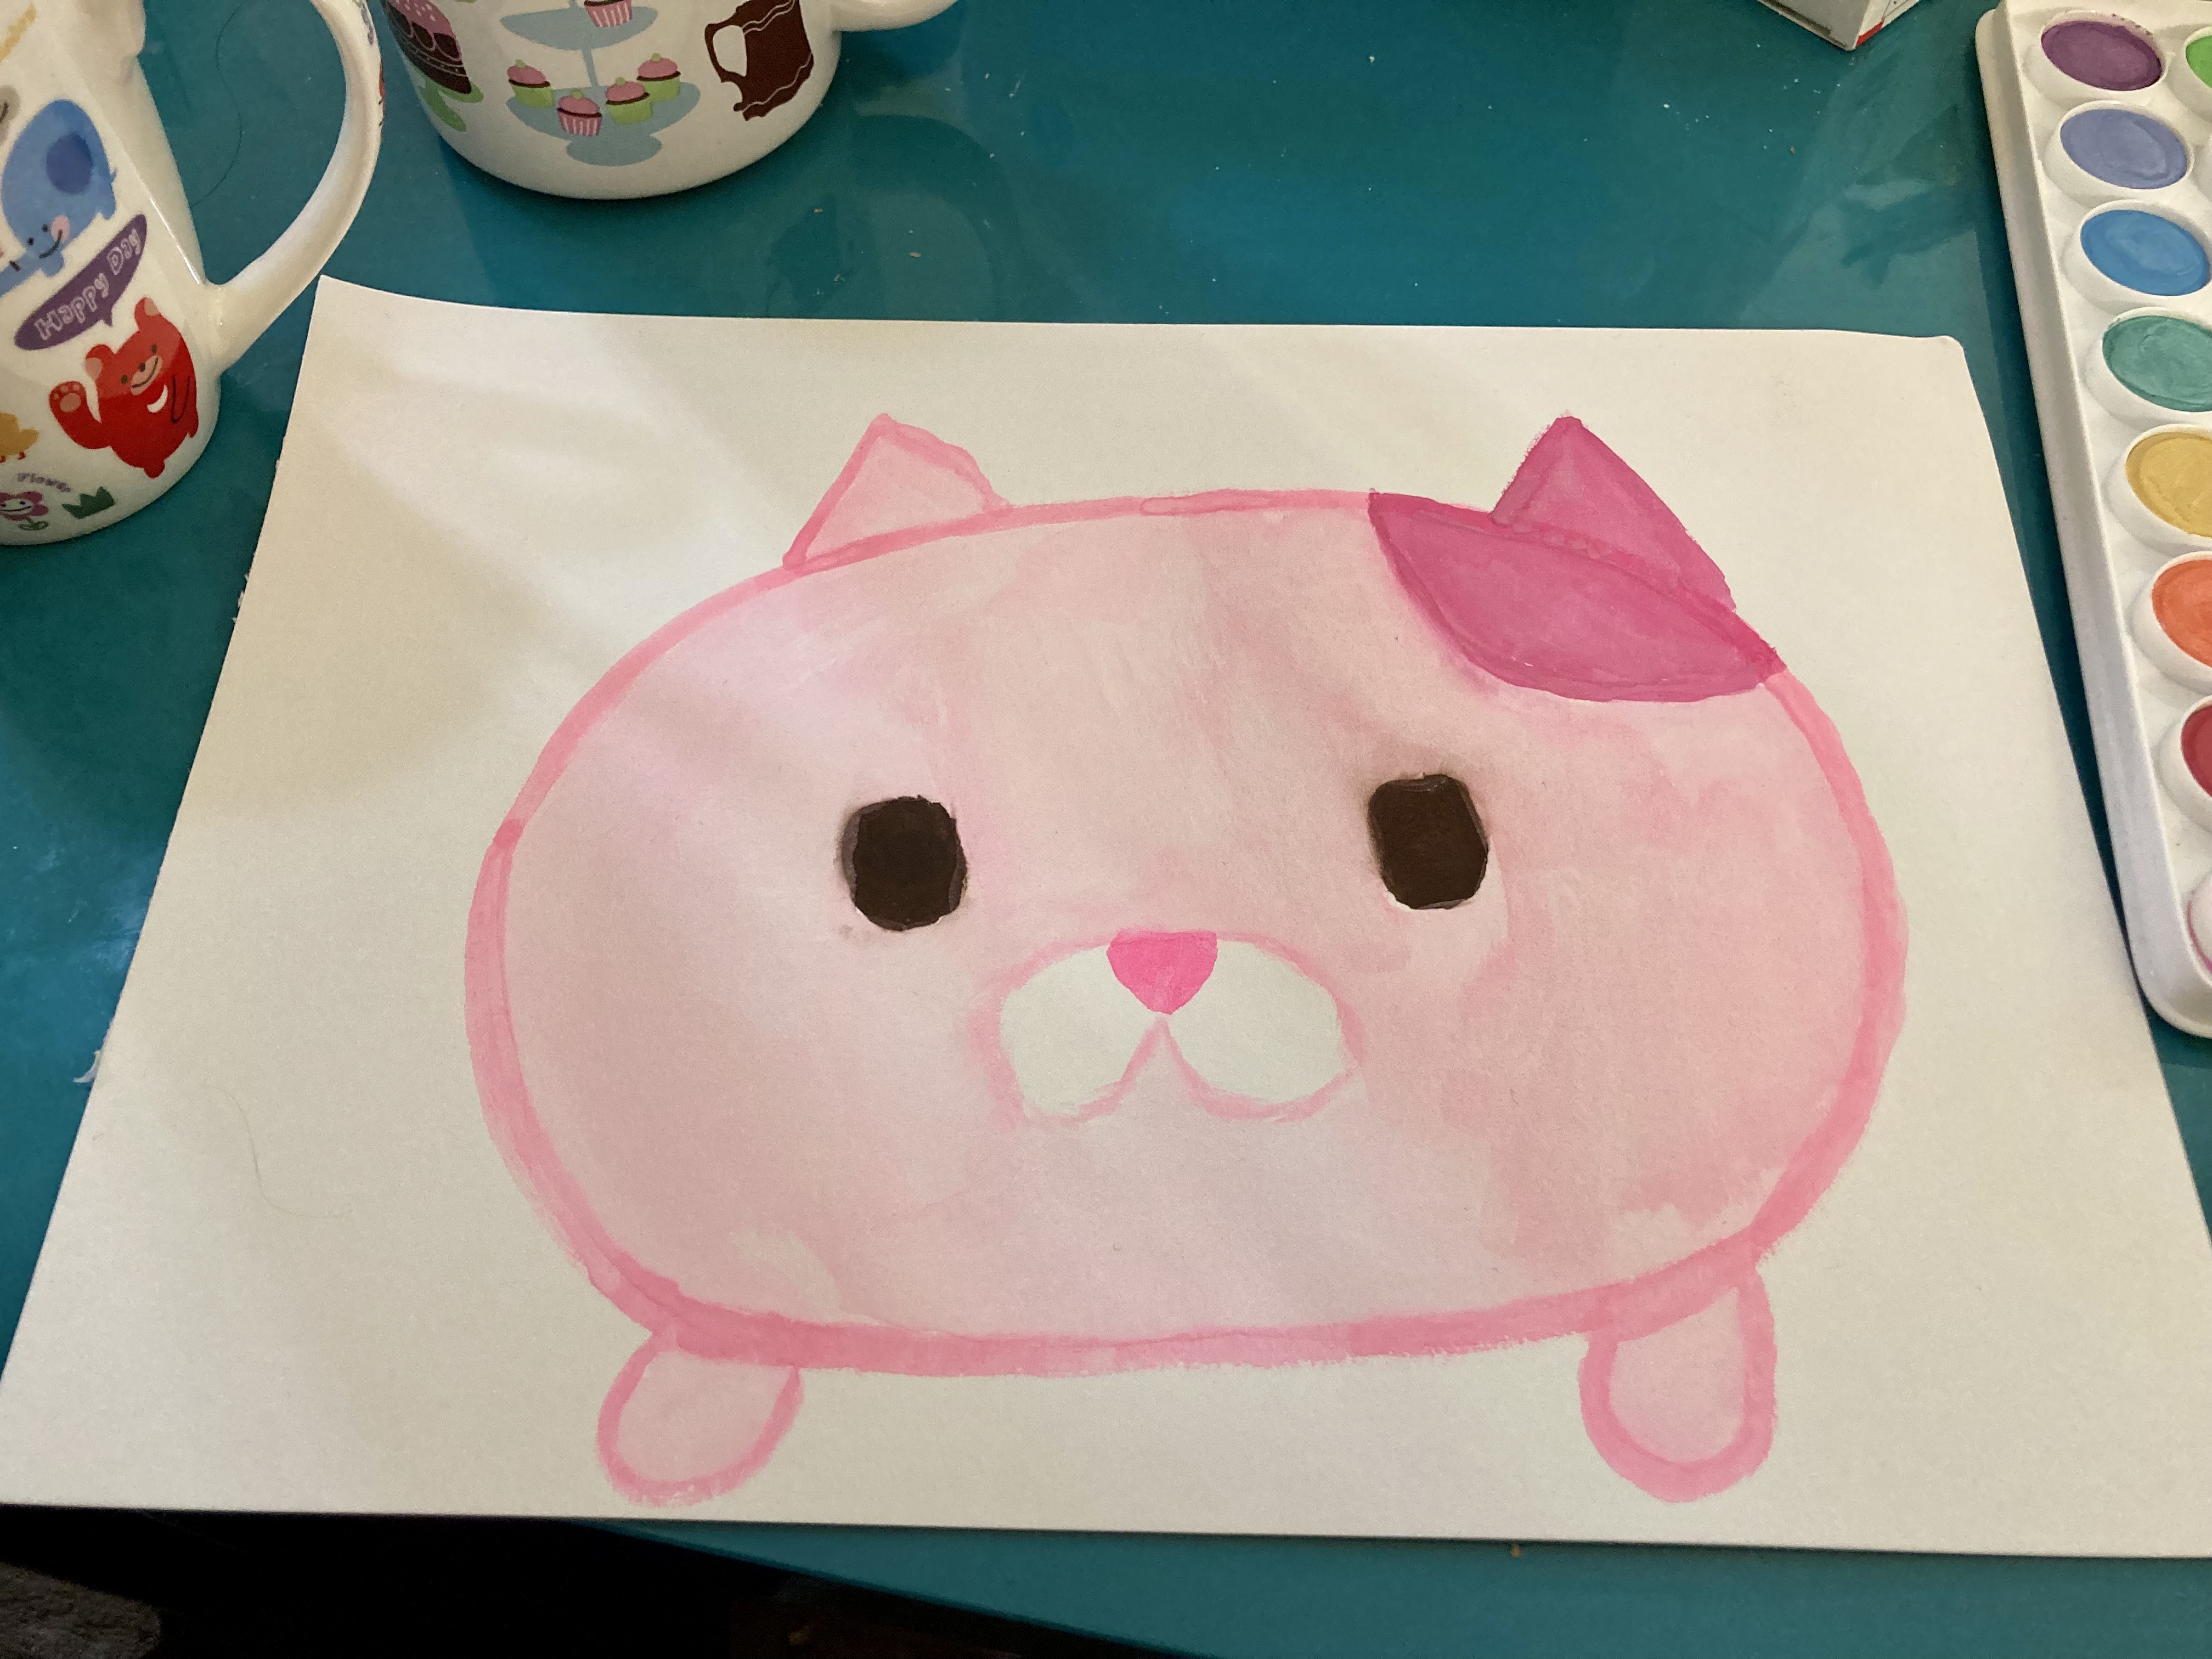 A watercolour paiting of a cartoonish pink creature somewhere between a pig and a cat.